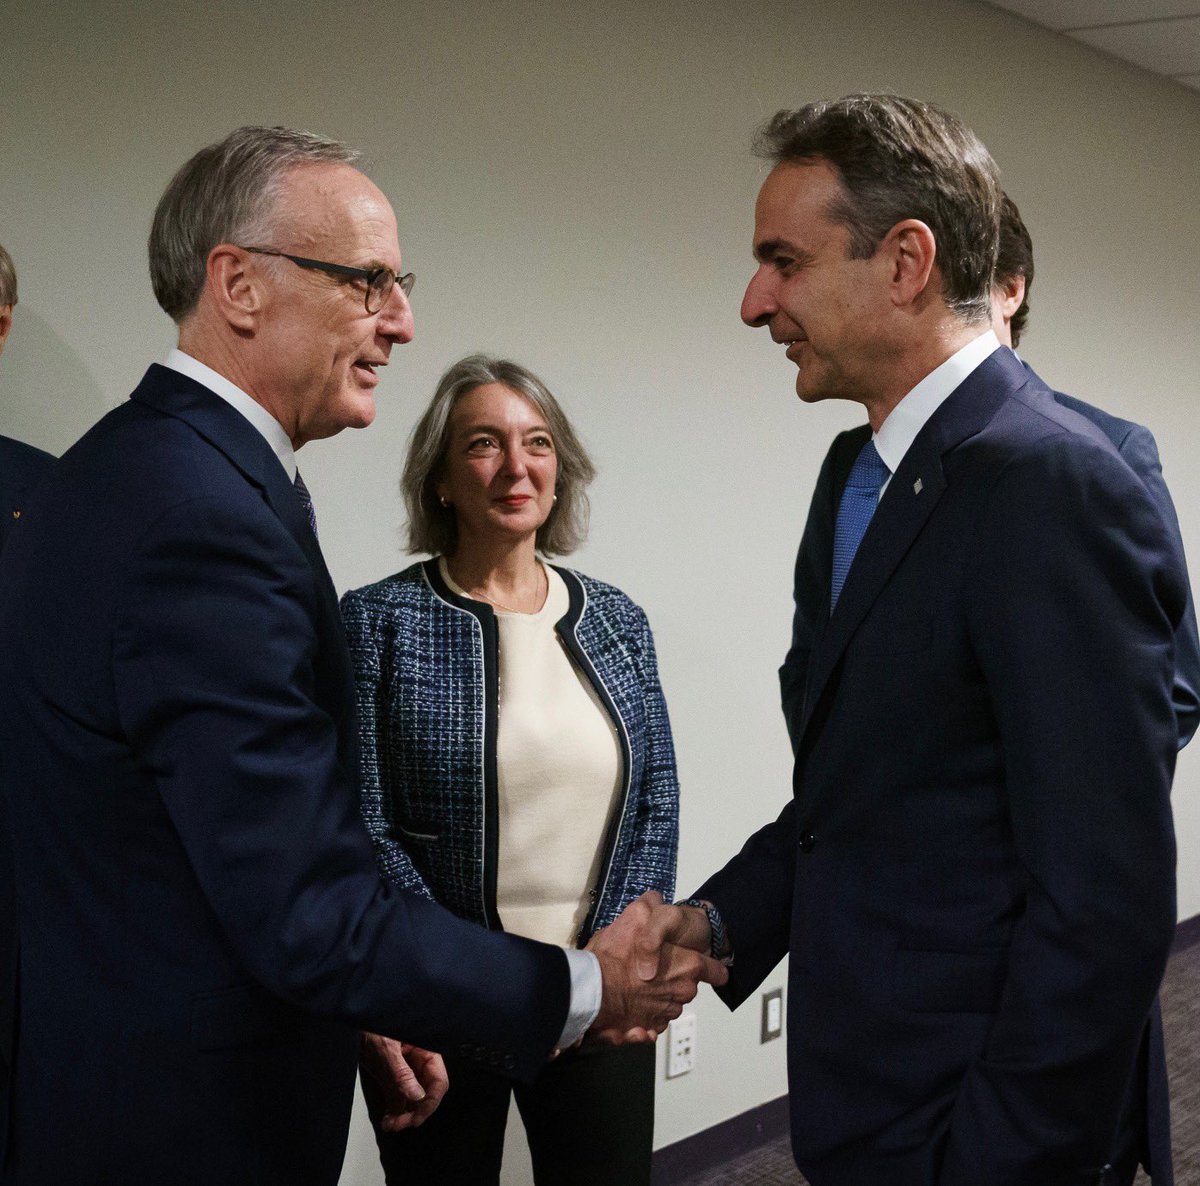 As Toronto celebrates #GreekIndependanceDay with the traditional parade on the Danforth, I am remembering my meeting with Greek PM @kmitsotakis on March 25. What an honour to welcome him to Toronto on the actual day. Chronia Polla!